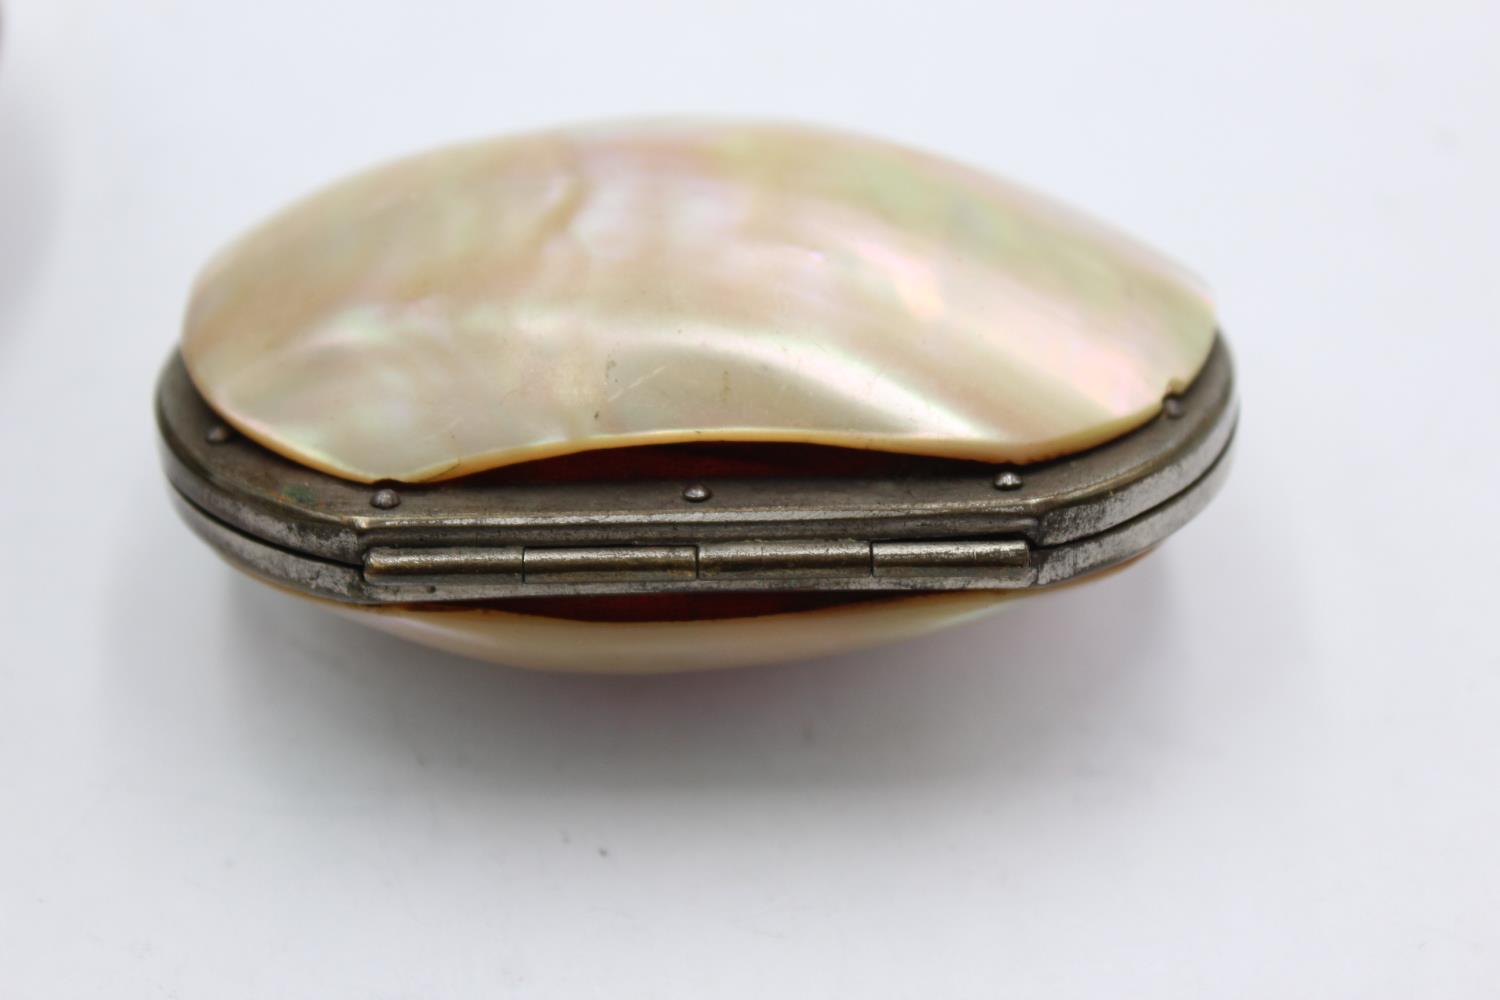 2 x Antique / Vintage Ladies MOTHER OF PEARL Shell Coin Purses / Cases In antique / vintage - Image 5 of 5